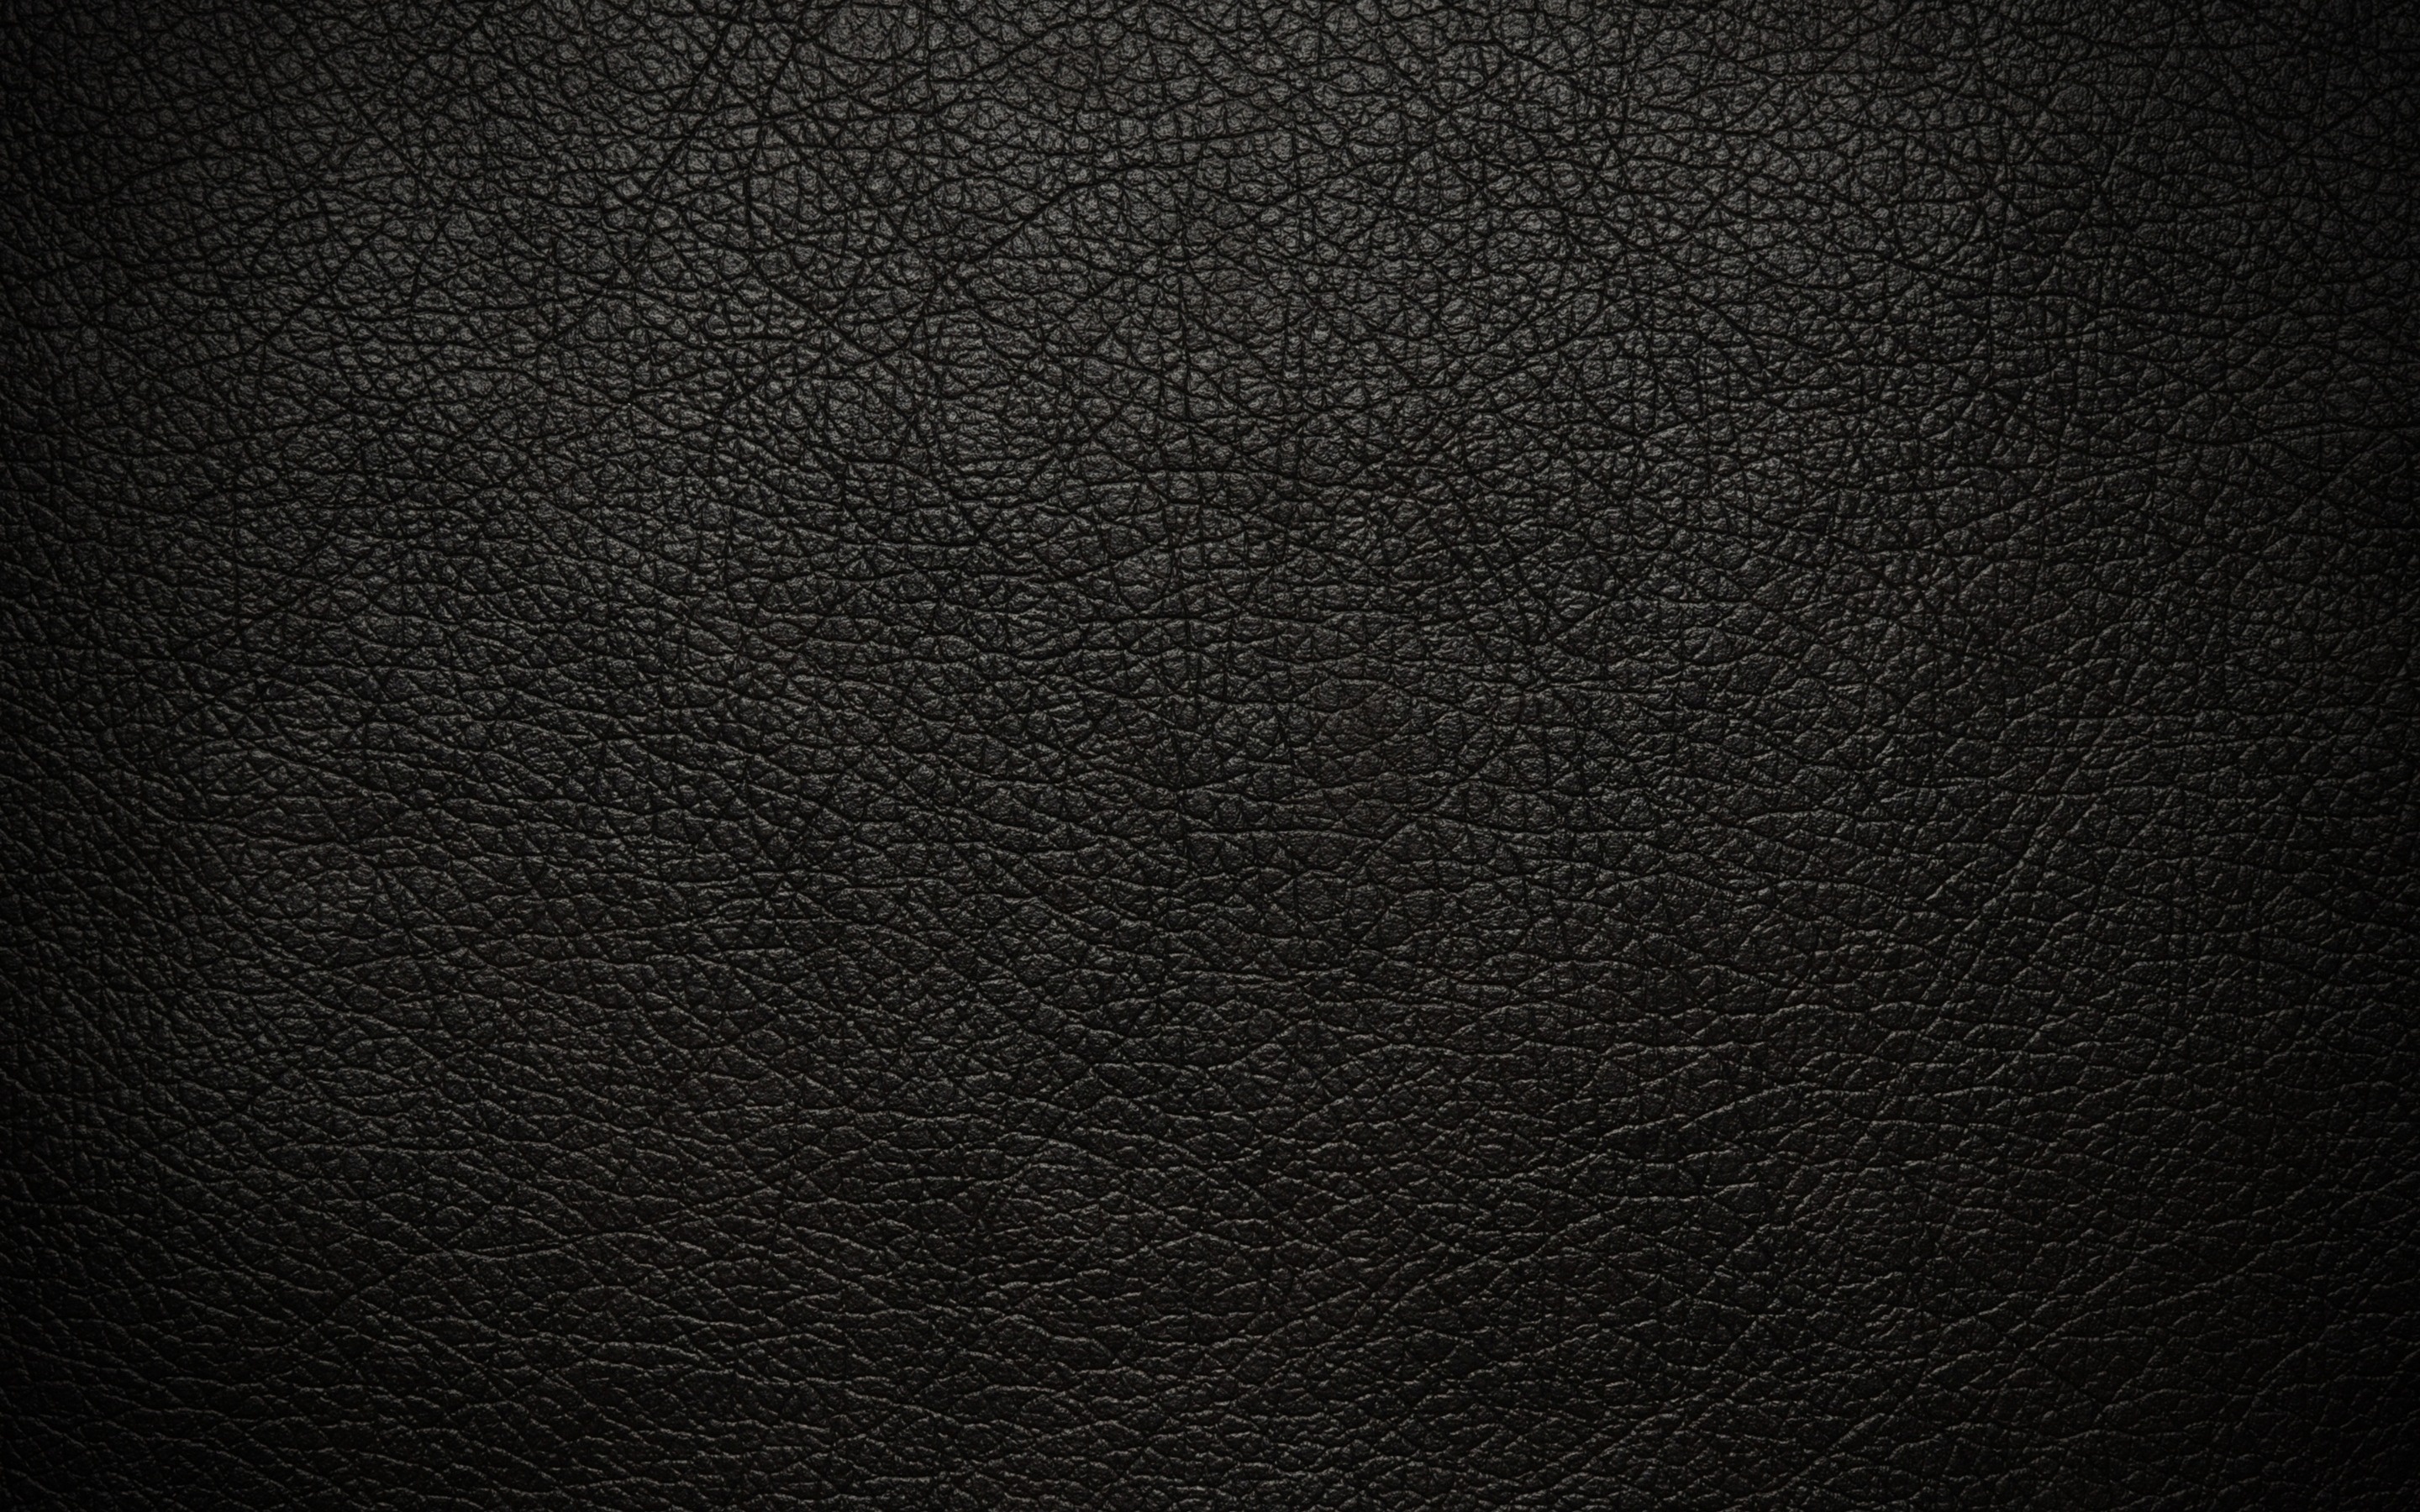 Free Leather Wallpaper 22544 1920x1200 px